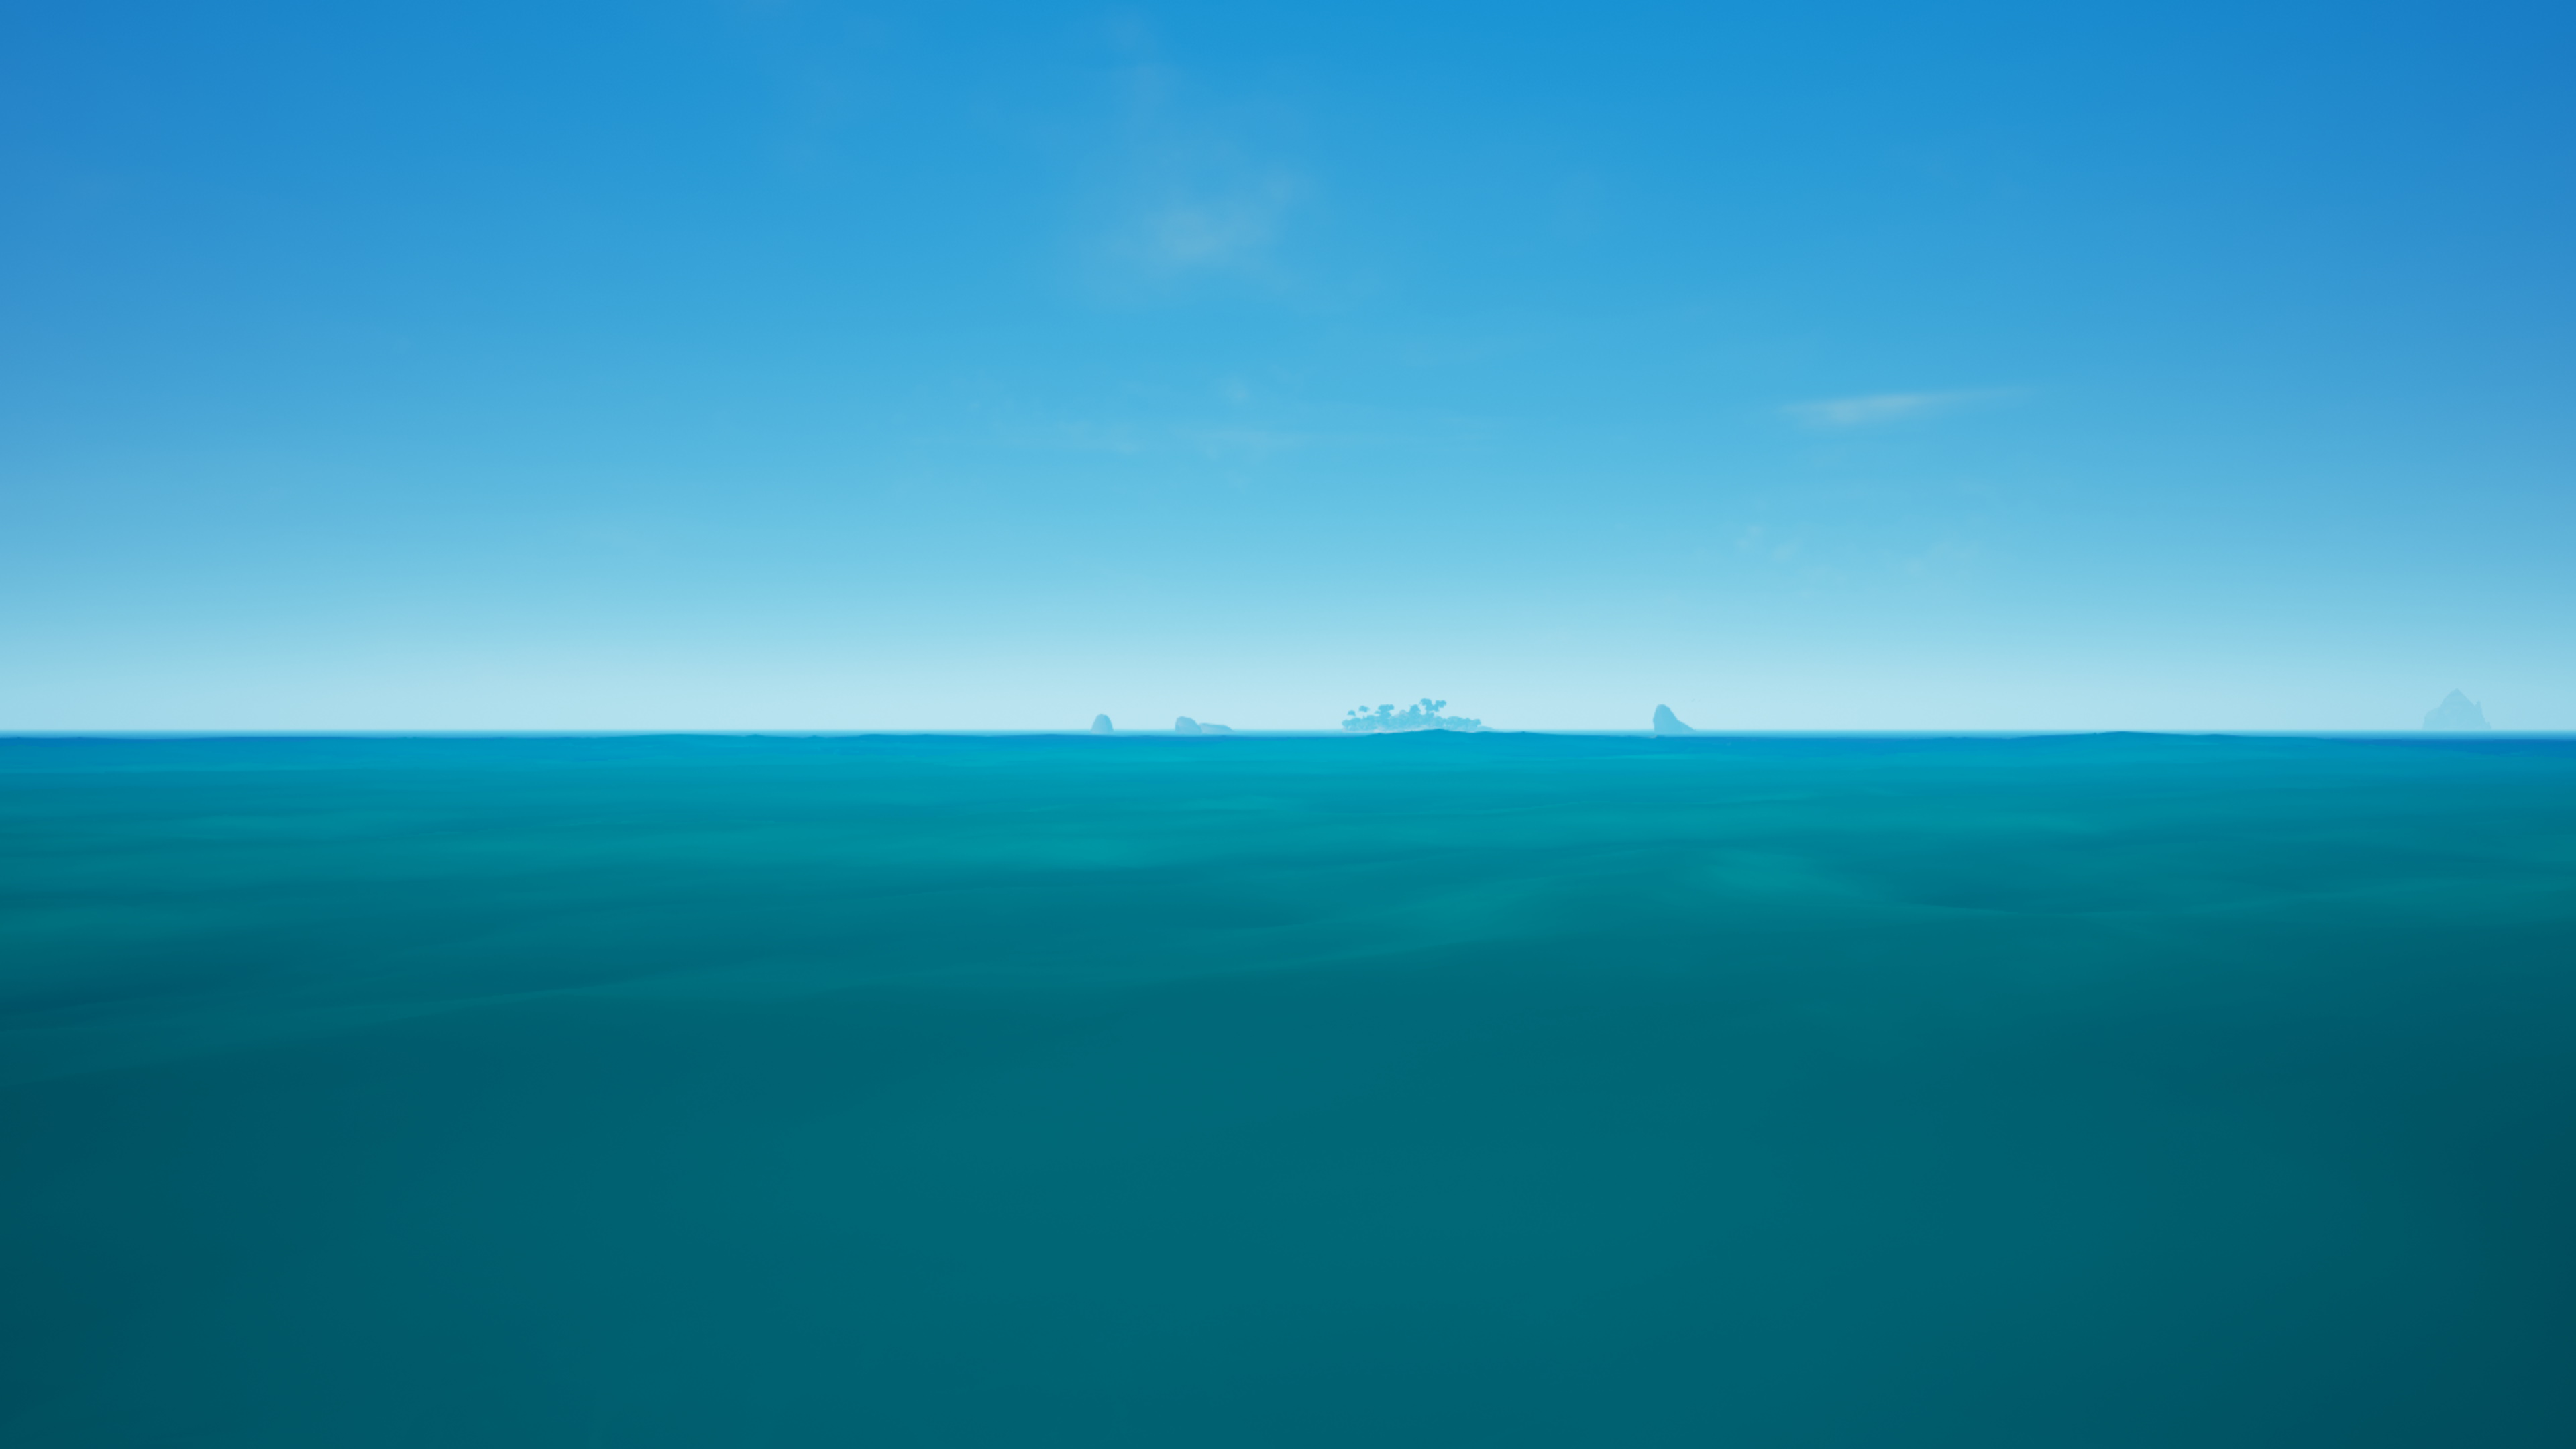 sea of theives crosshair overlay